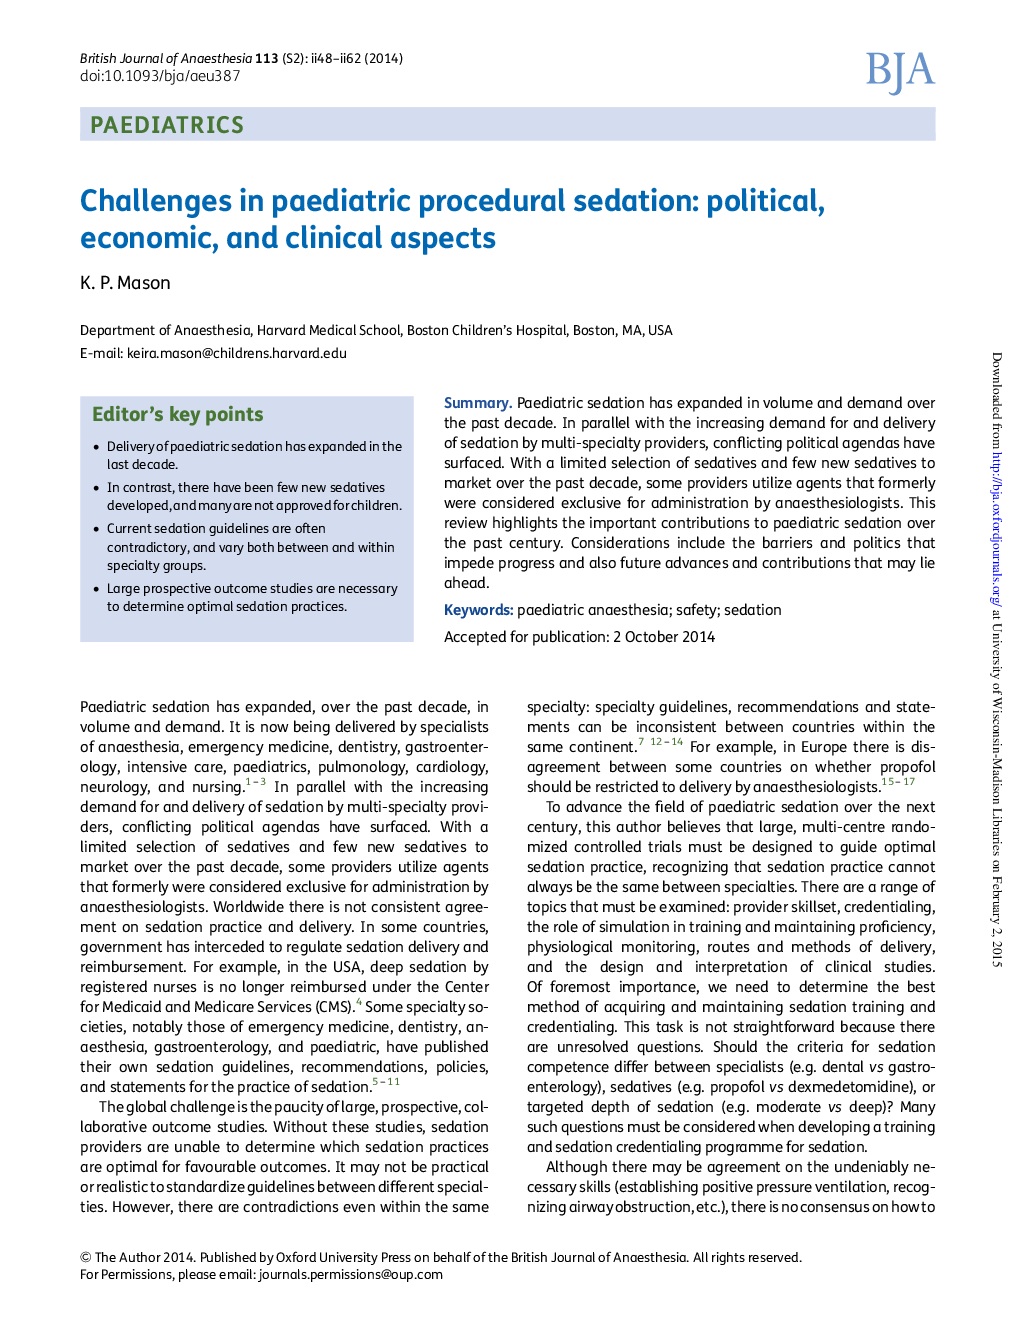 Challenges in paediatric procedural sedation: political, economic, and clinical aspects